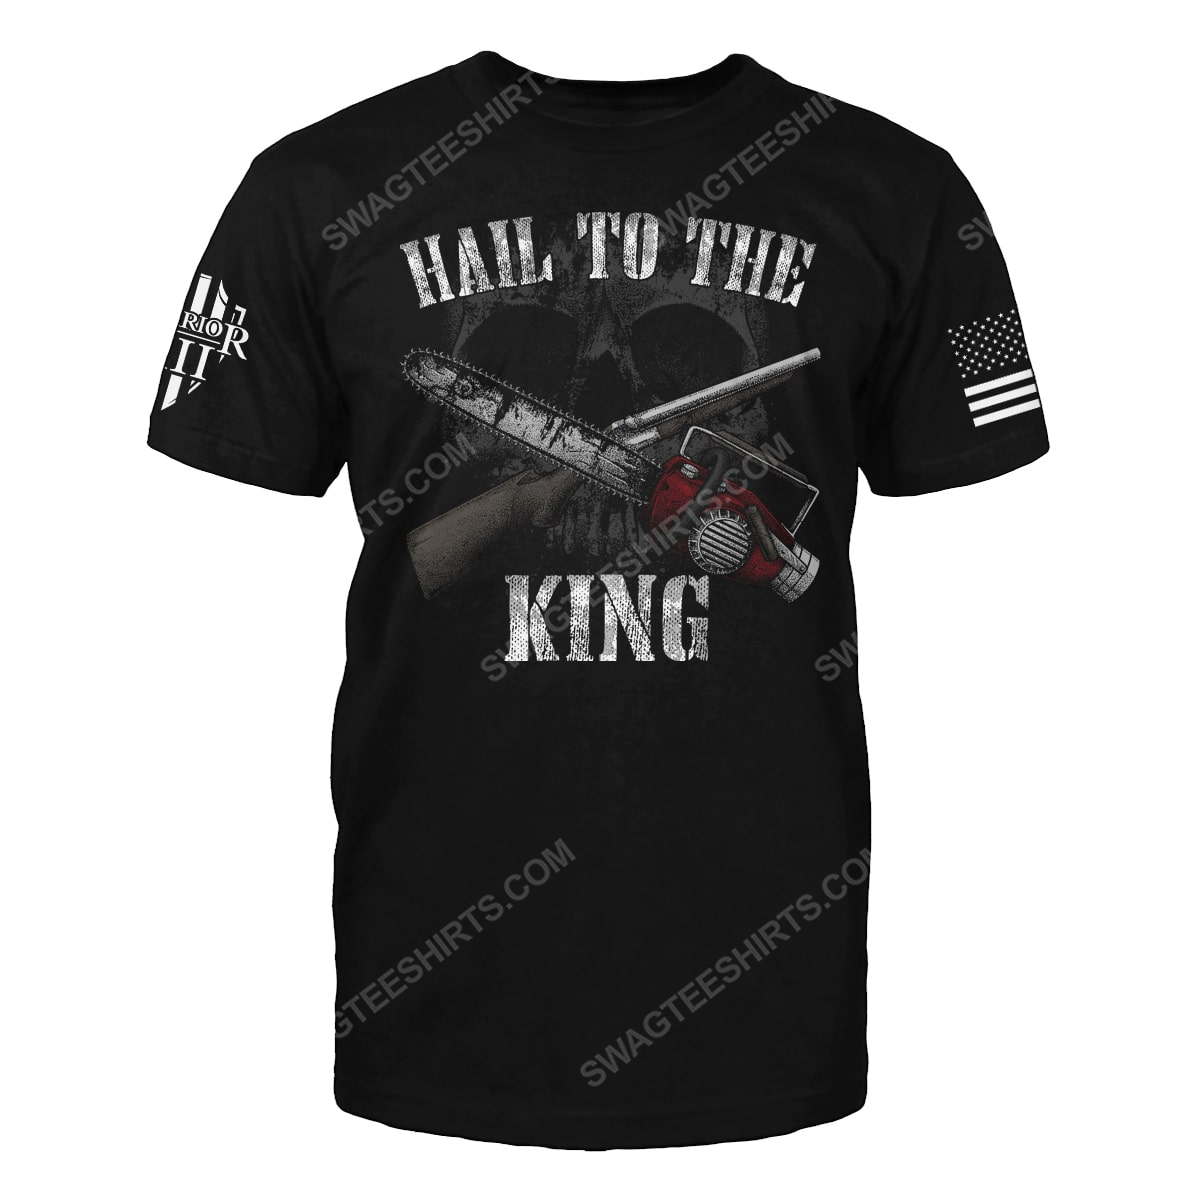 Hail to the king skull and saw shirt 5(1)